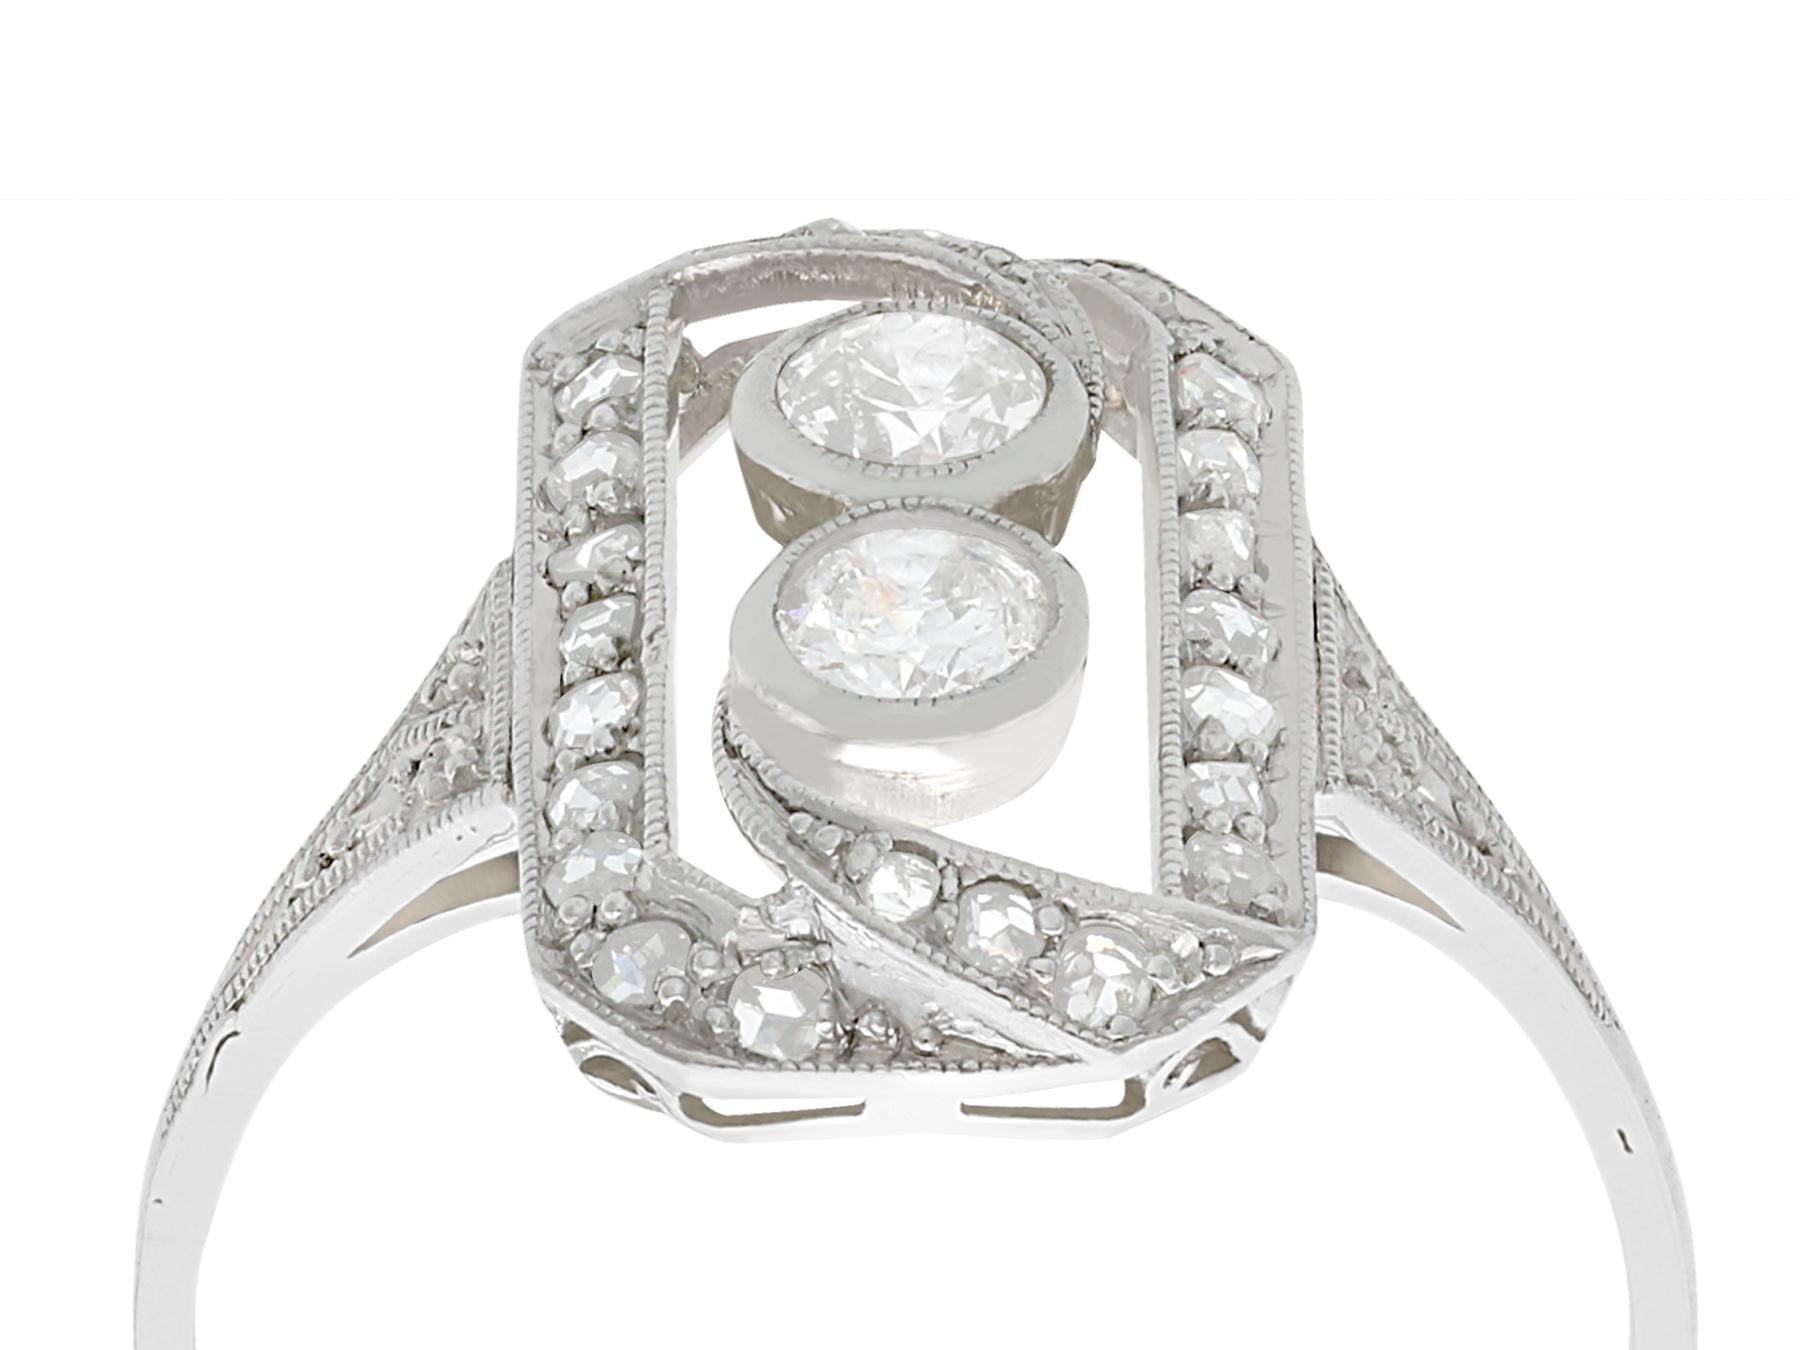 An impressive antique 0.63 carat diamond and 18 karat white gold dress ring; part of our diverse antique jewellery and estate jewelry collections.

This fine and impressive diamond cocktail ring has been crafted in 18k white gold.

The pierced